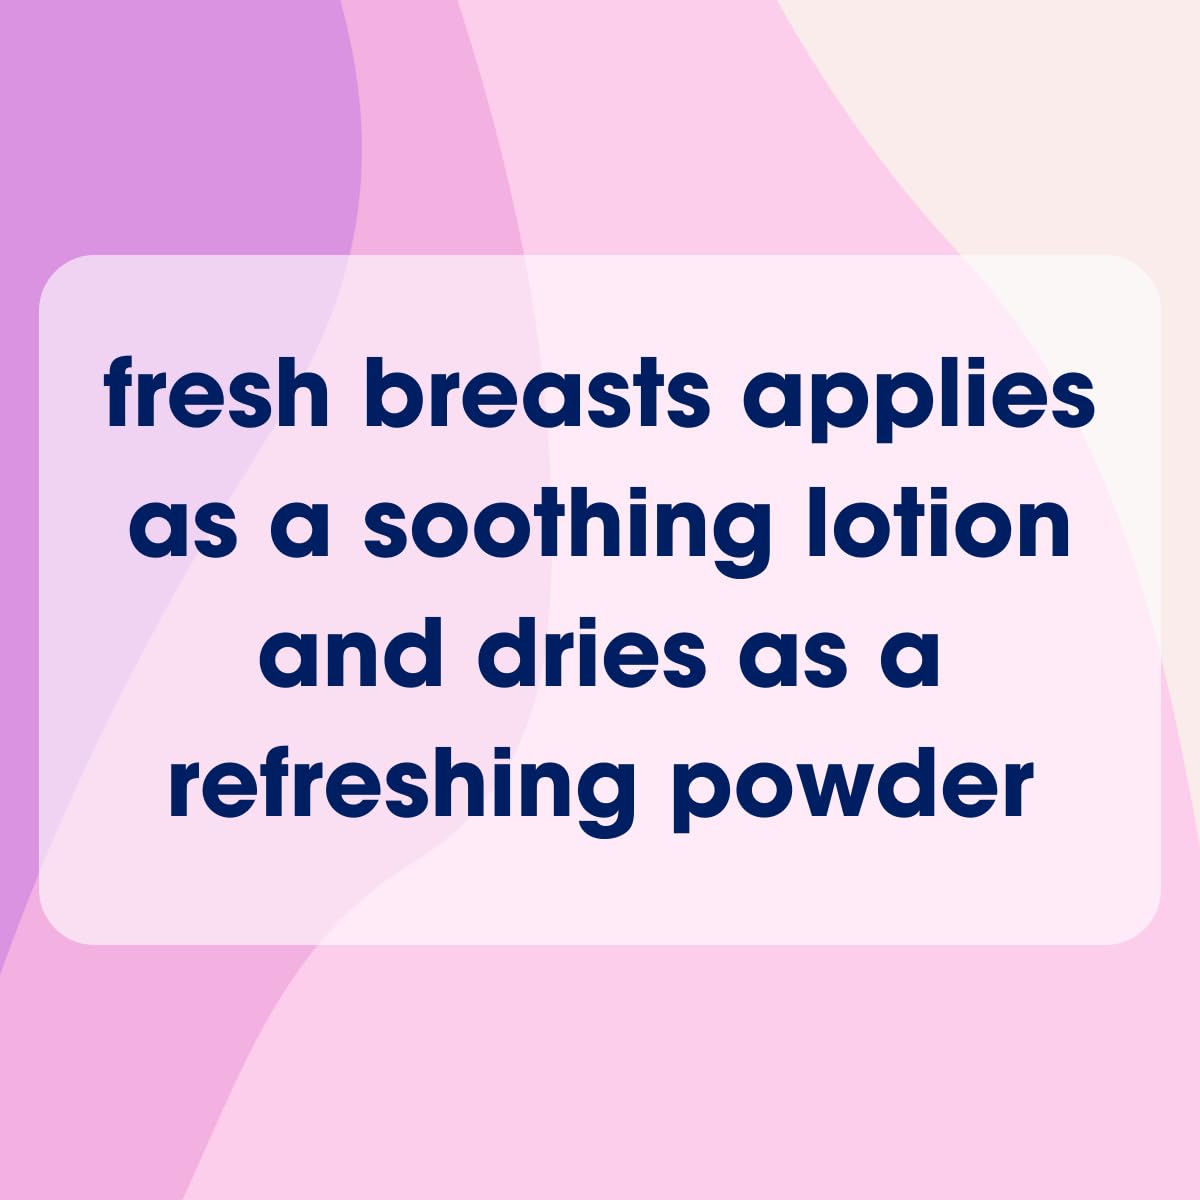 Fresh Body Fresh Breasts On-The-Go Anti Chafing Deodorant Lotion to Powder - Unscented, 0.07 oz Travel Size (30 Pack) Soothing Lotion for Women - No Talc, Aluminum or Fragrance : Beauty & Personal Care